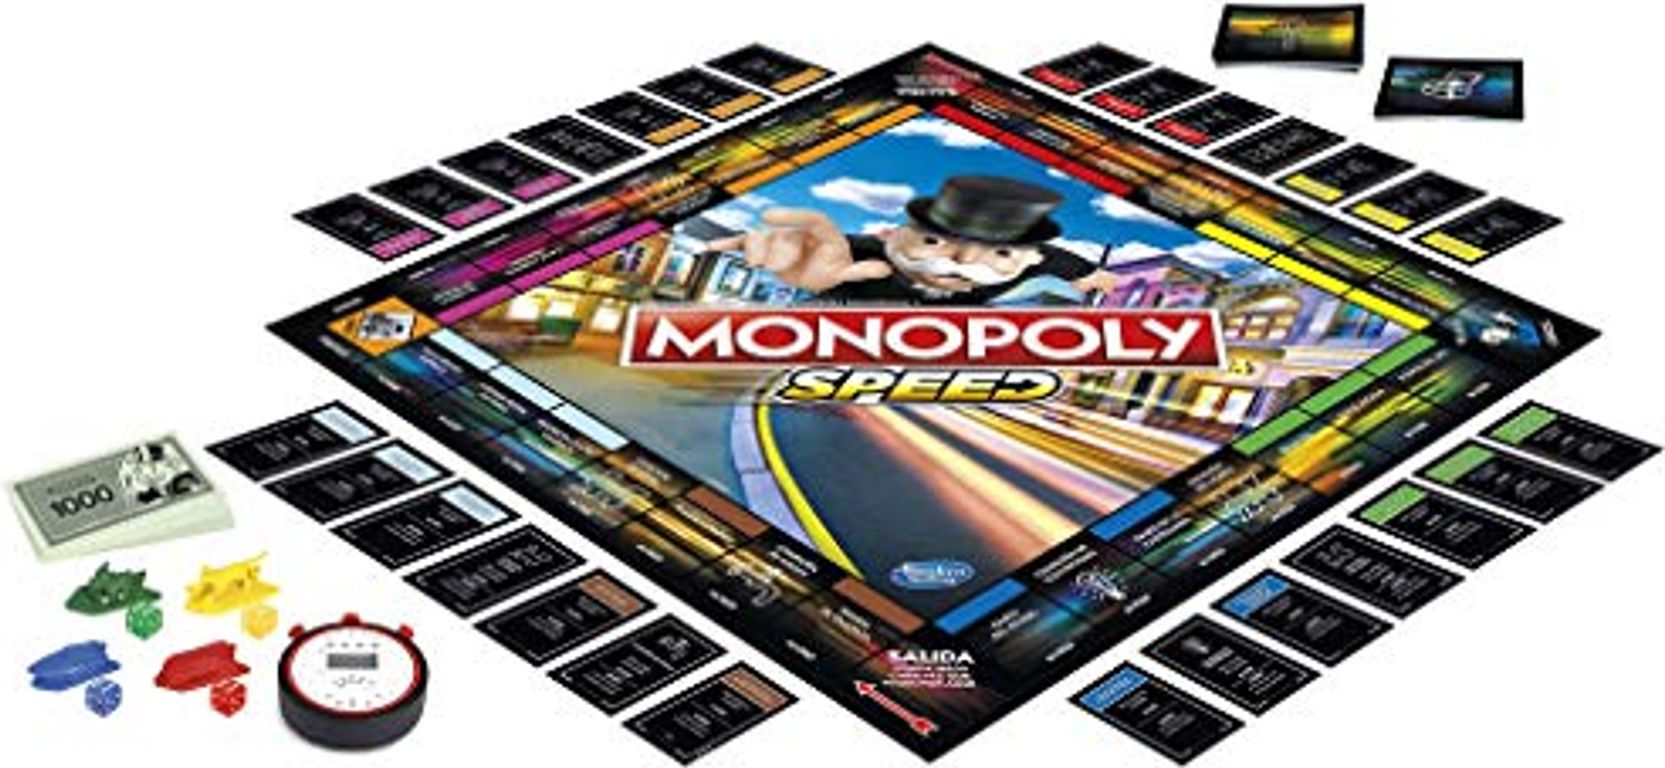 Monopoly Speed components